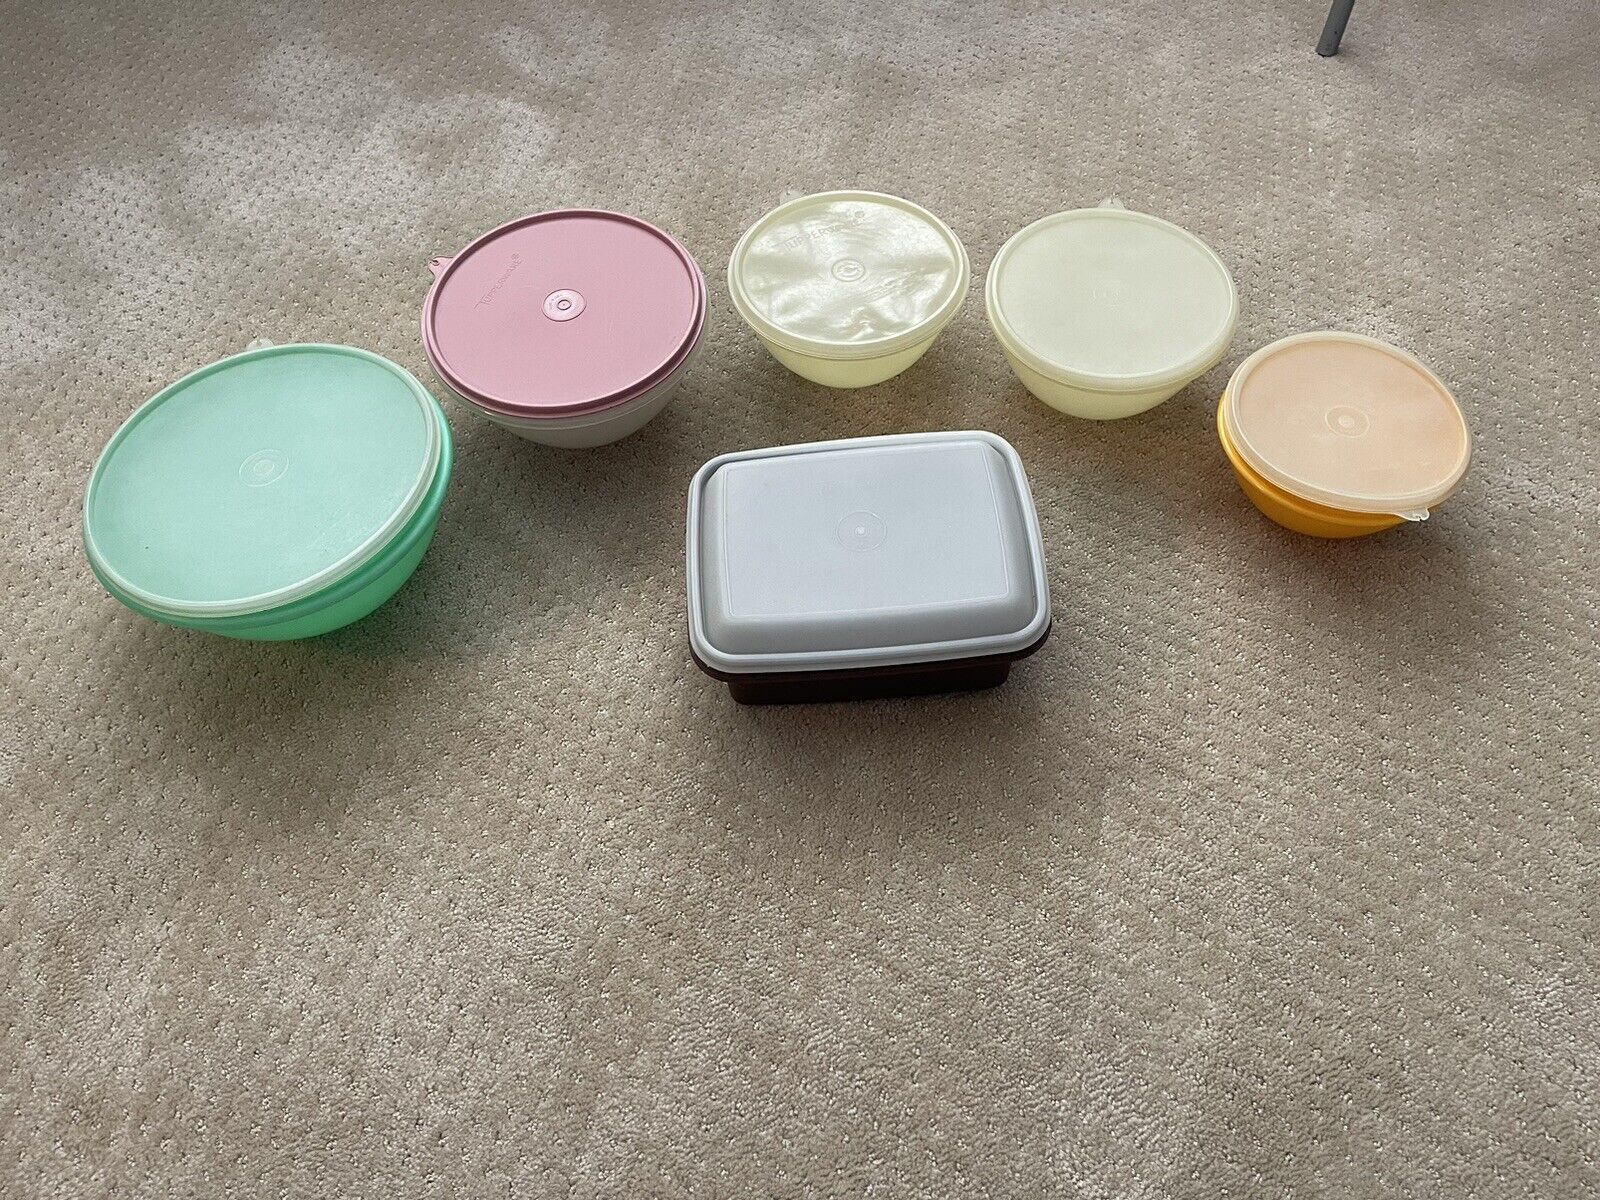 TUPPERWARE (Vtg) Serving Mixing Bowls w/Lids 6 Containers (Sold Separately)